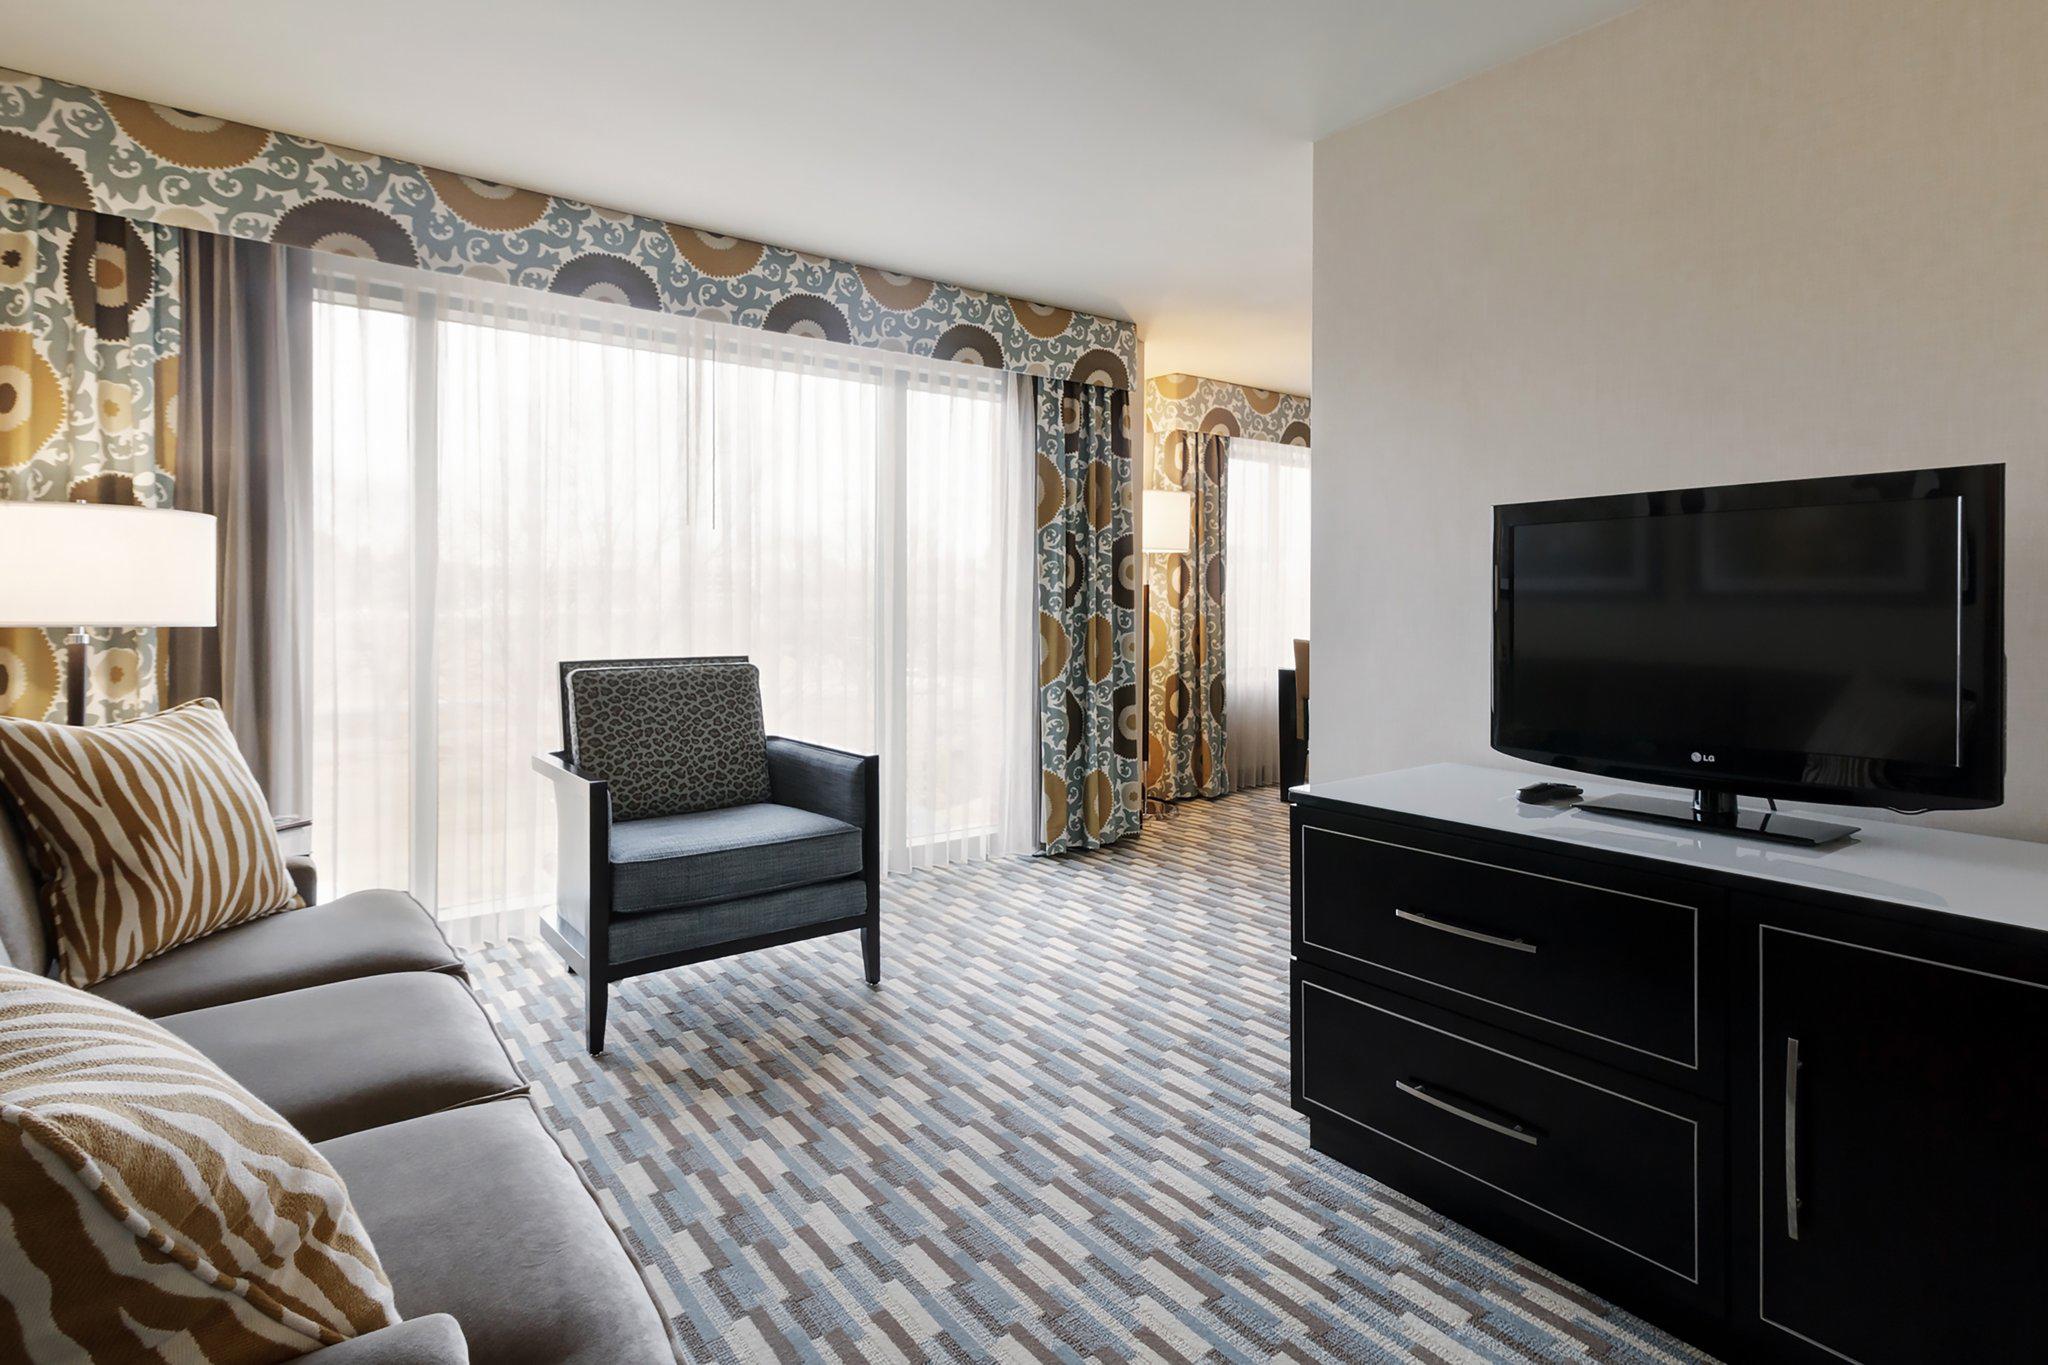 Holiday Inn Express & Suites Warwick-Providence (Airport) Photo